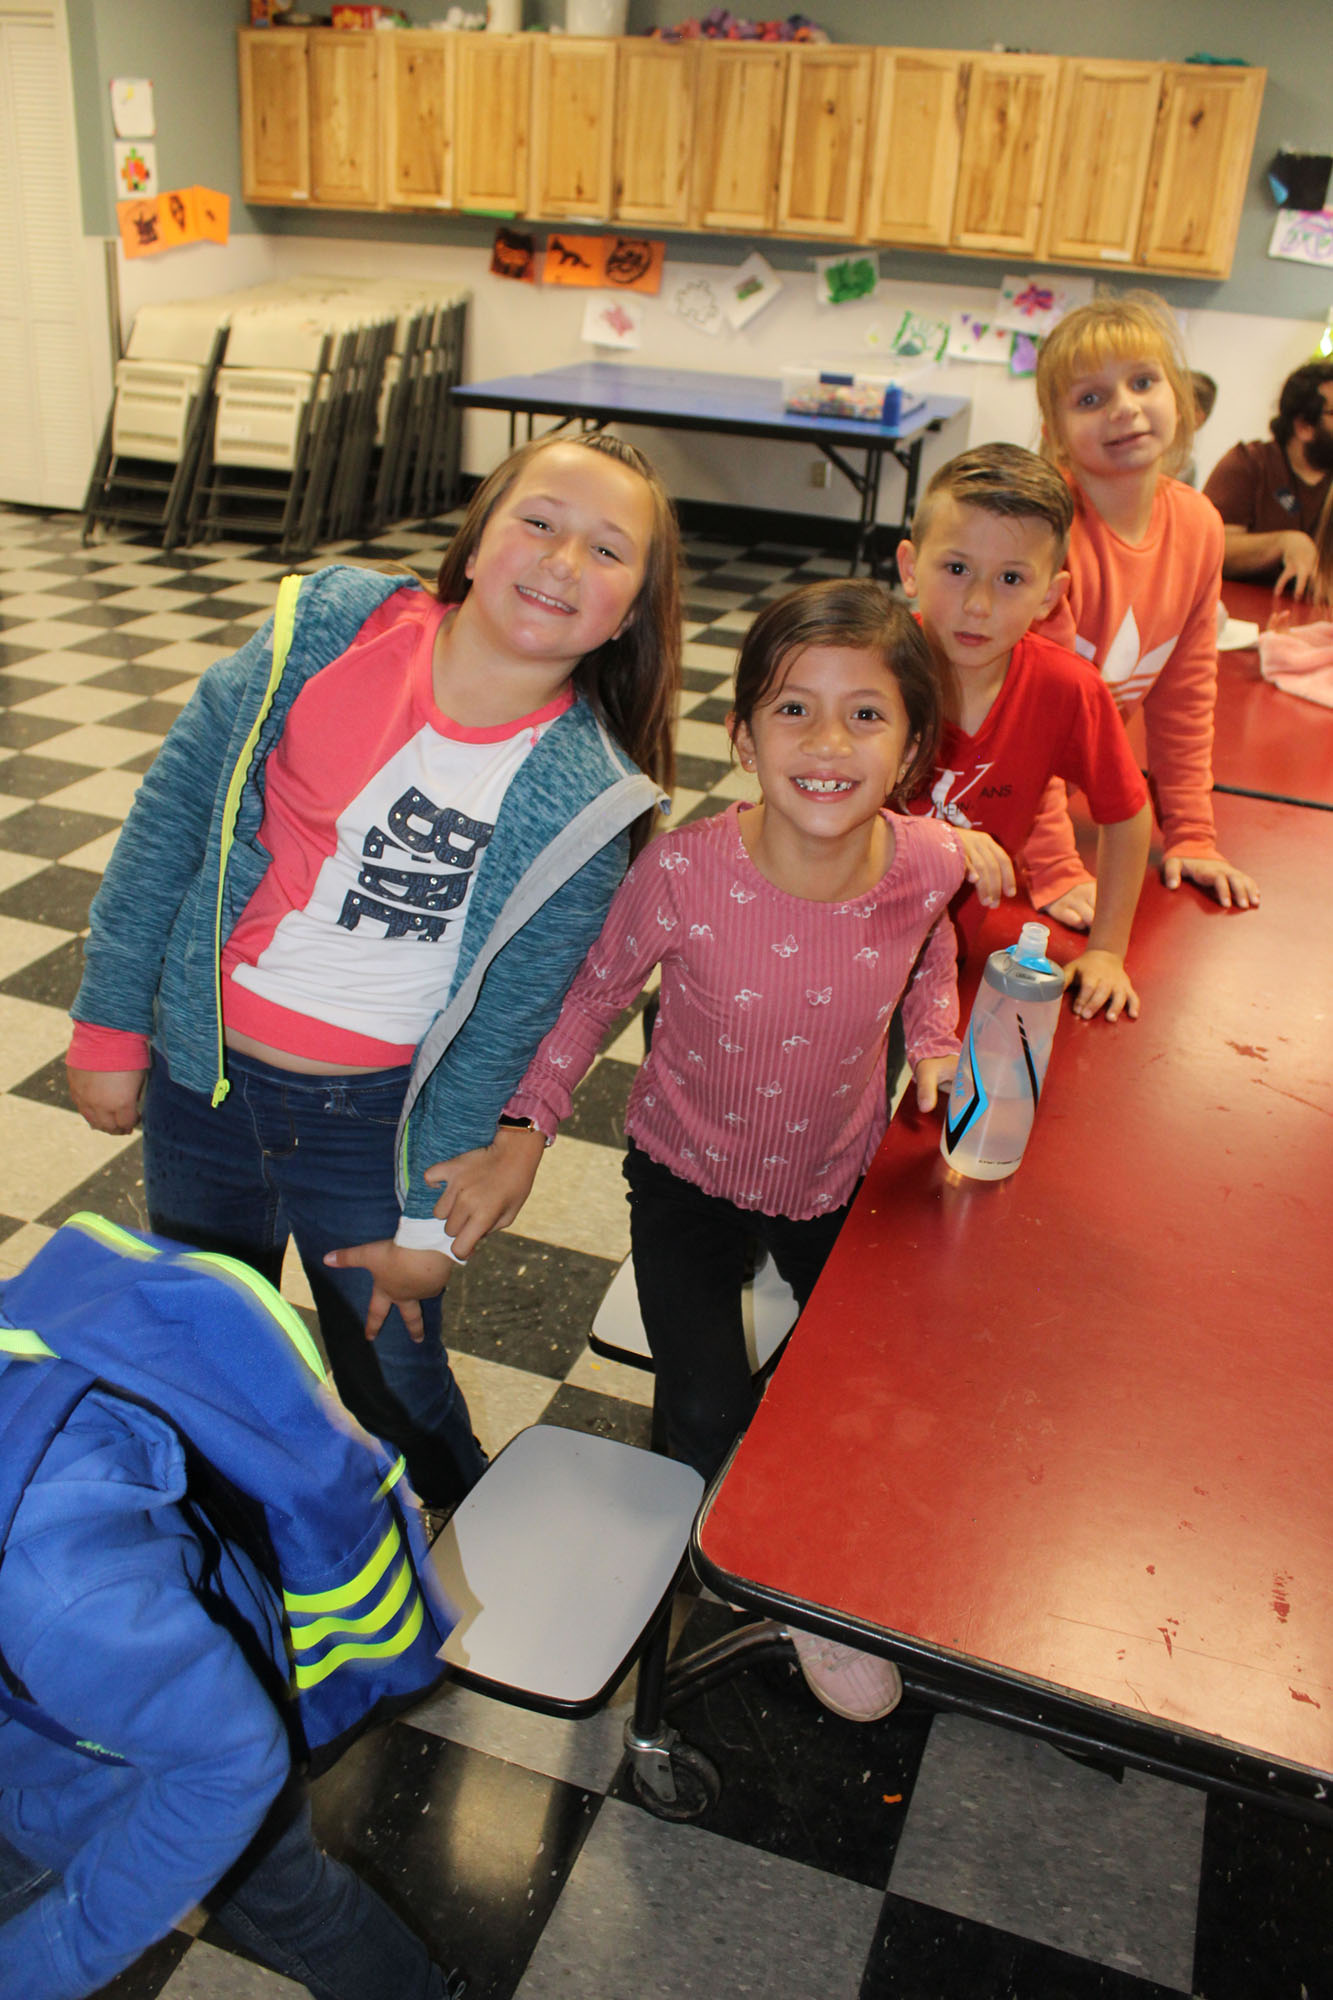 Children at table during after school activities in Twin Falls, ID.